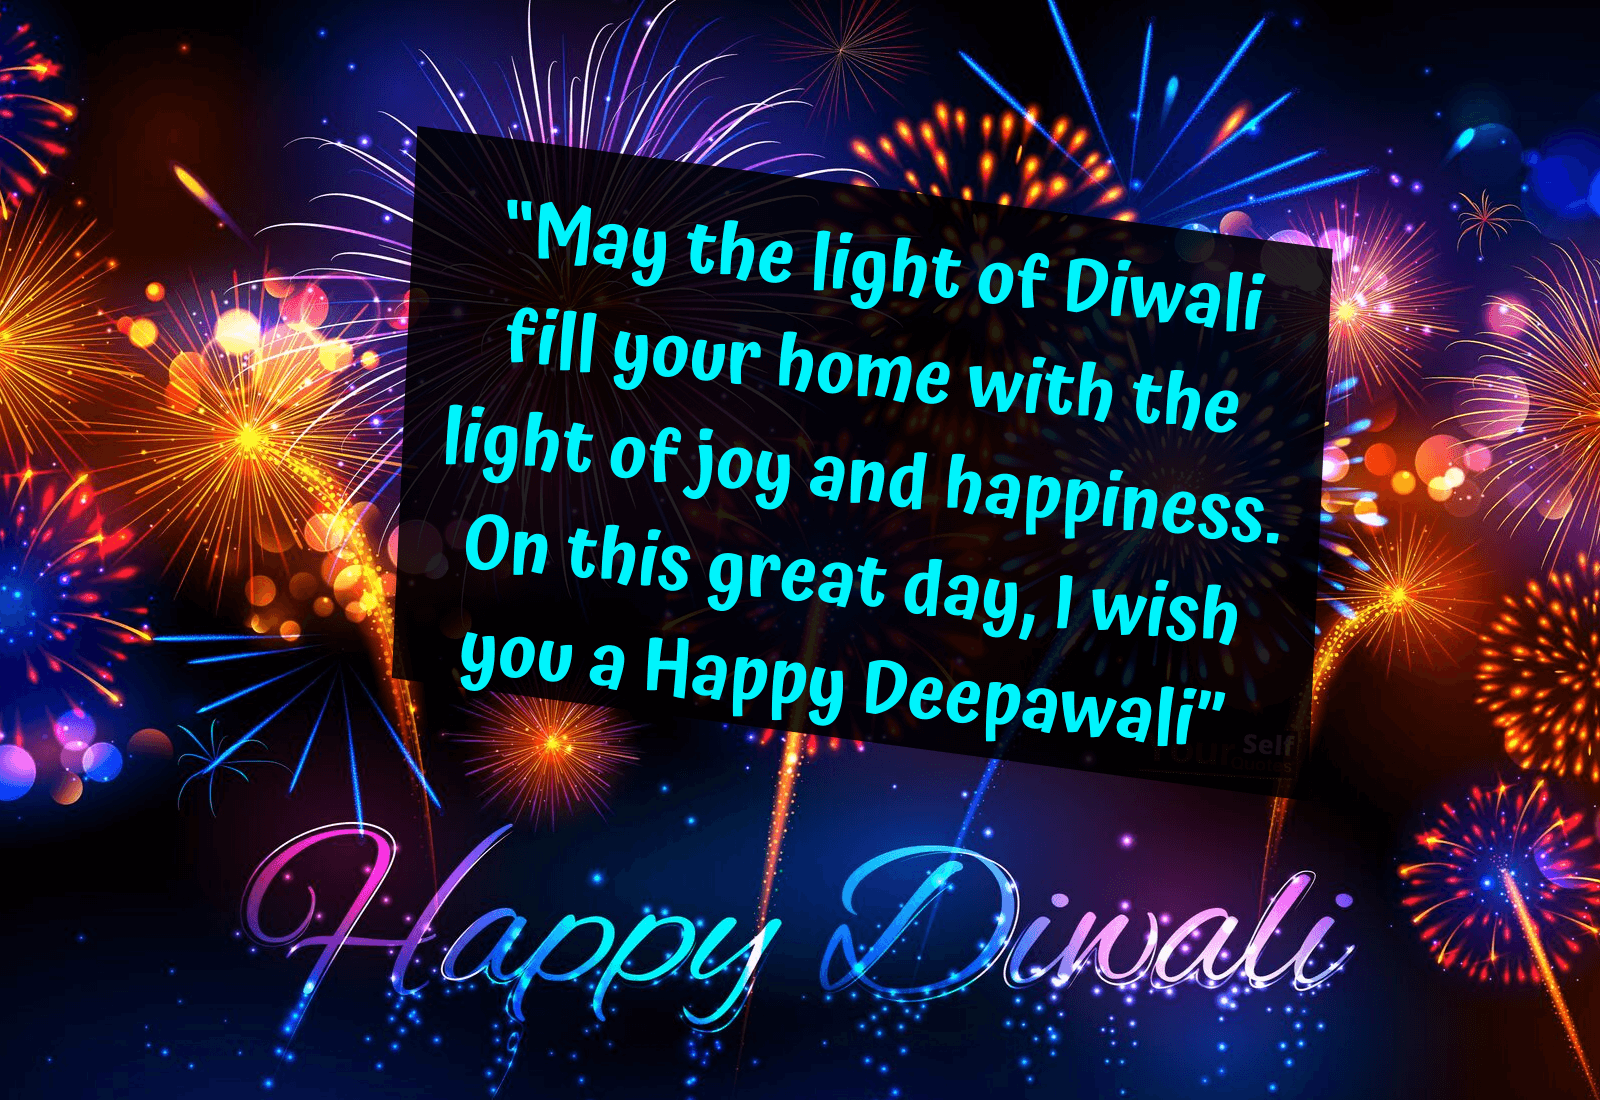 Best DiwaliWishes Images